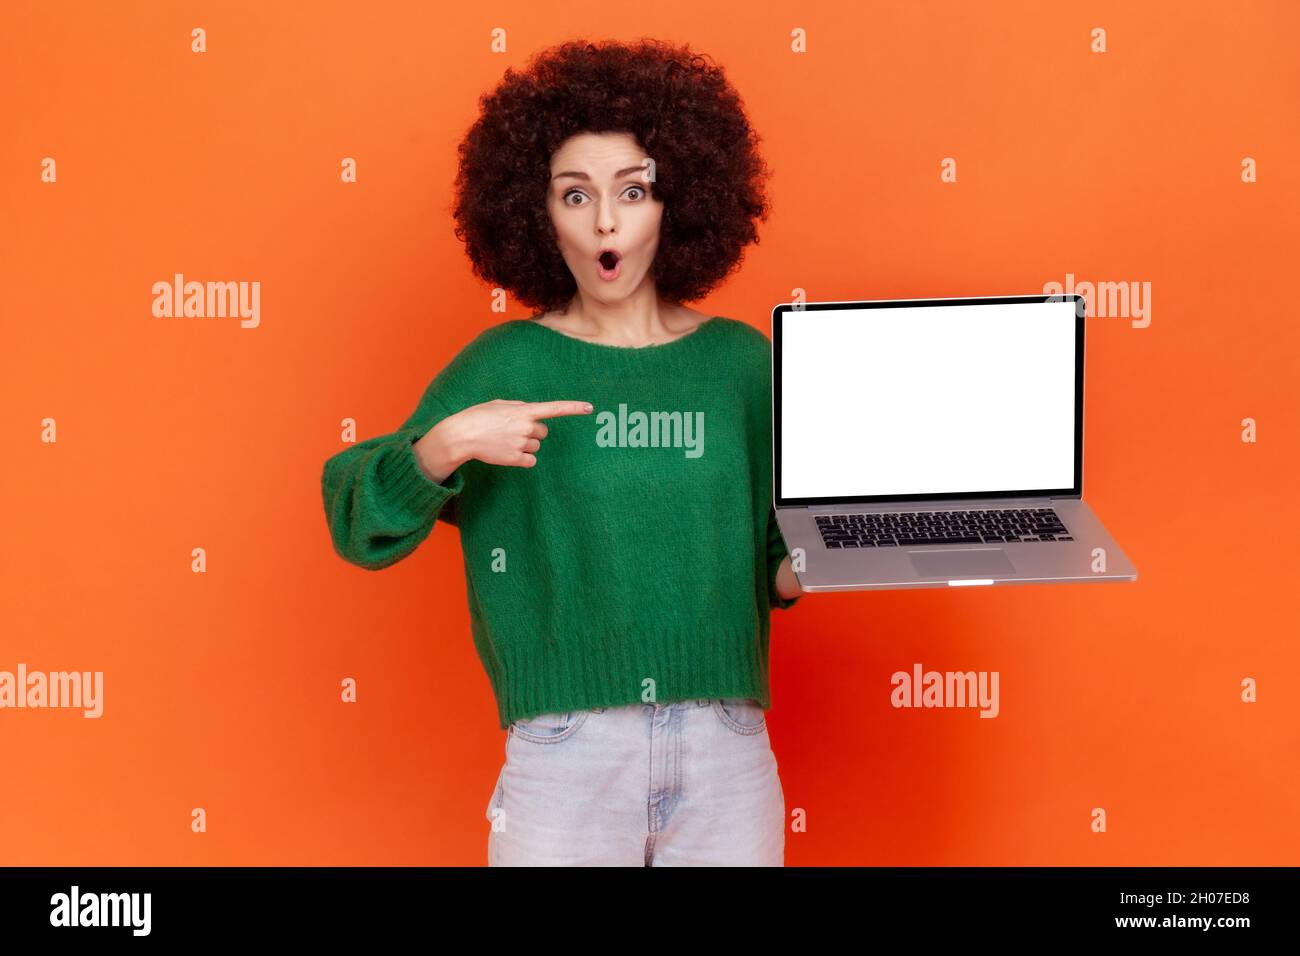 Shocked woman with Afro hairstyle wearing green casual style sweater pointing at white empty display of her portable computer, copy space. Indoor studio shot isolated on orange background. Stock Photo